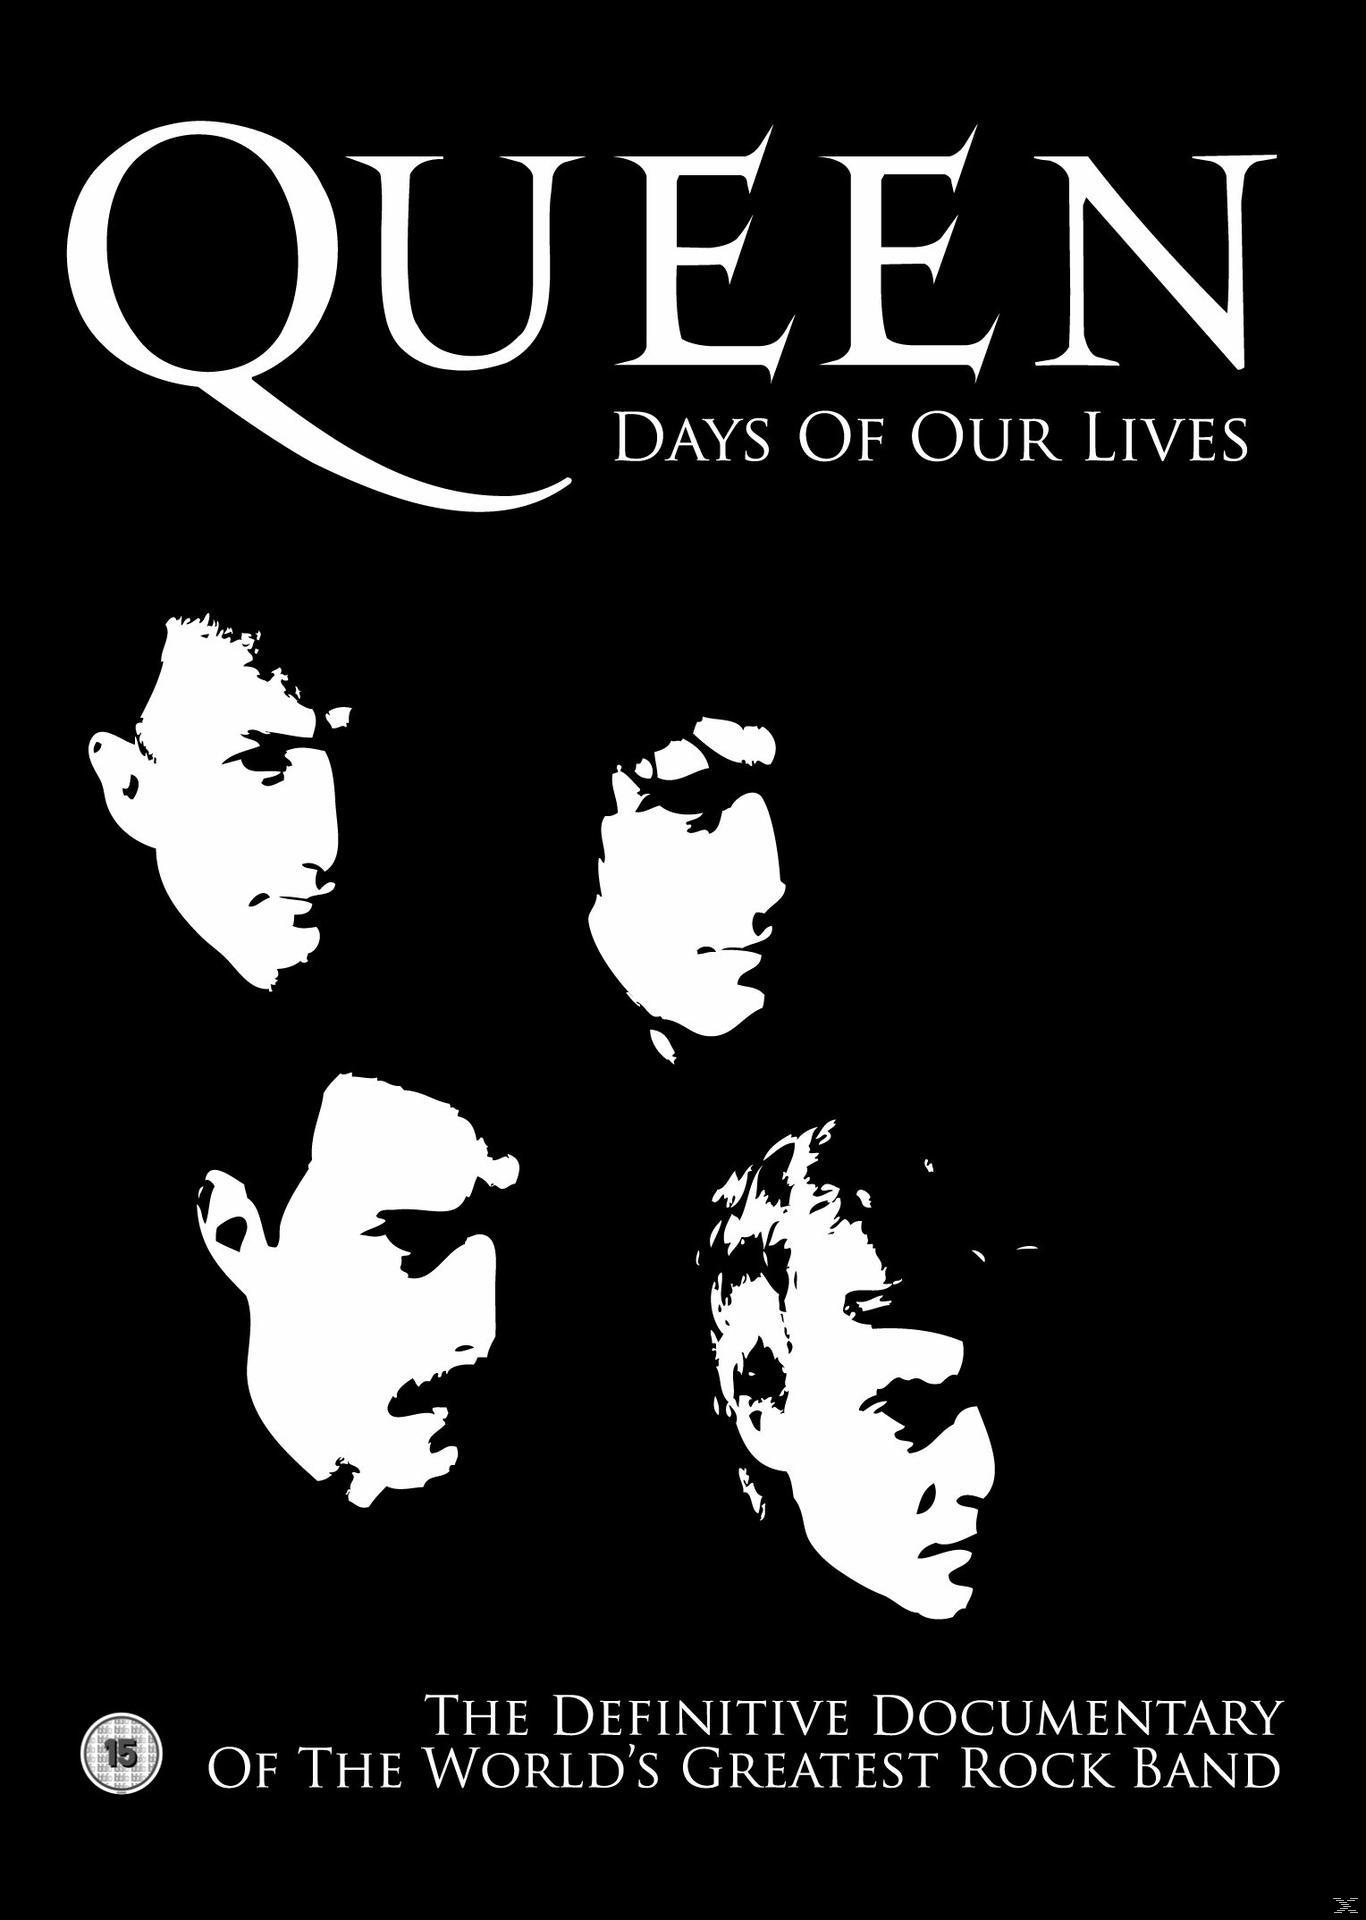 - The Greatest Definite Of Queen Rock Documentary Our The Band Days - - Lives Of World\'s (DVD)